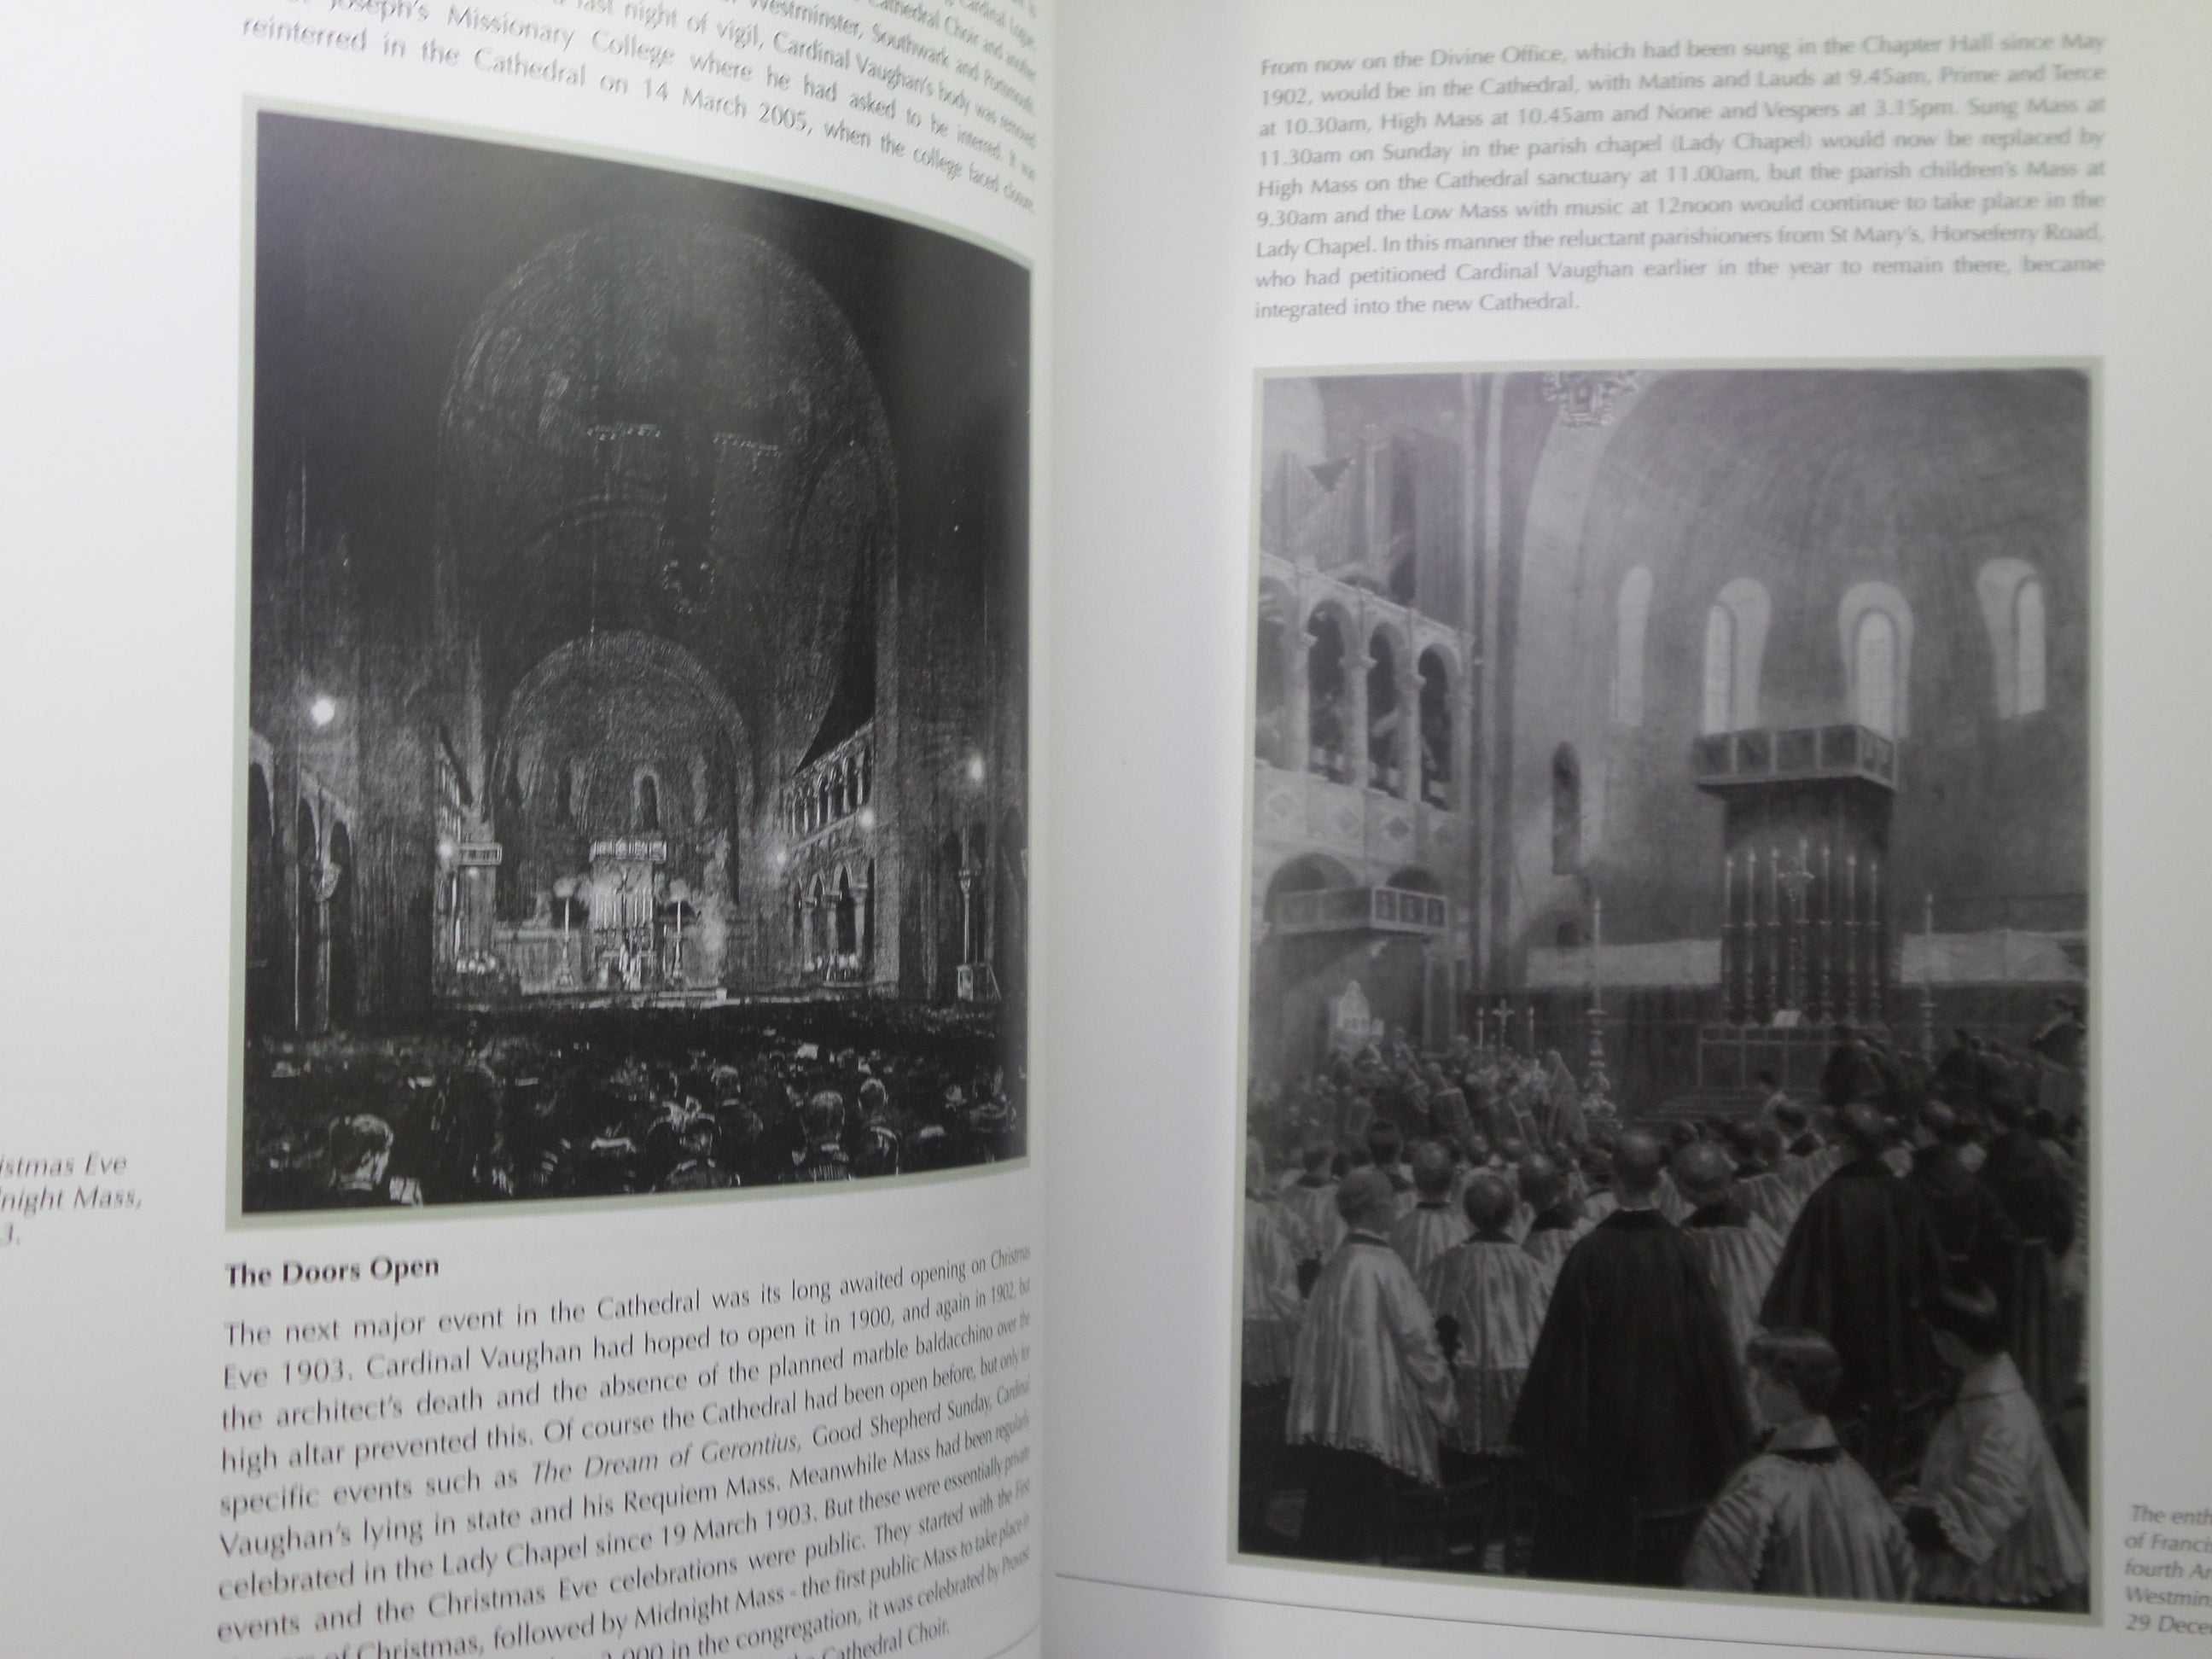 WESTMINSTER CATHEDRAL: AN ILLUSTRATED HISTORY BY PATRICK ROGERS